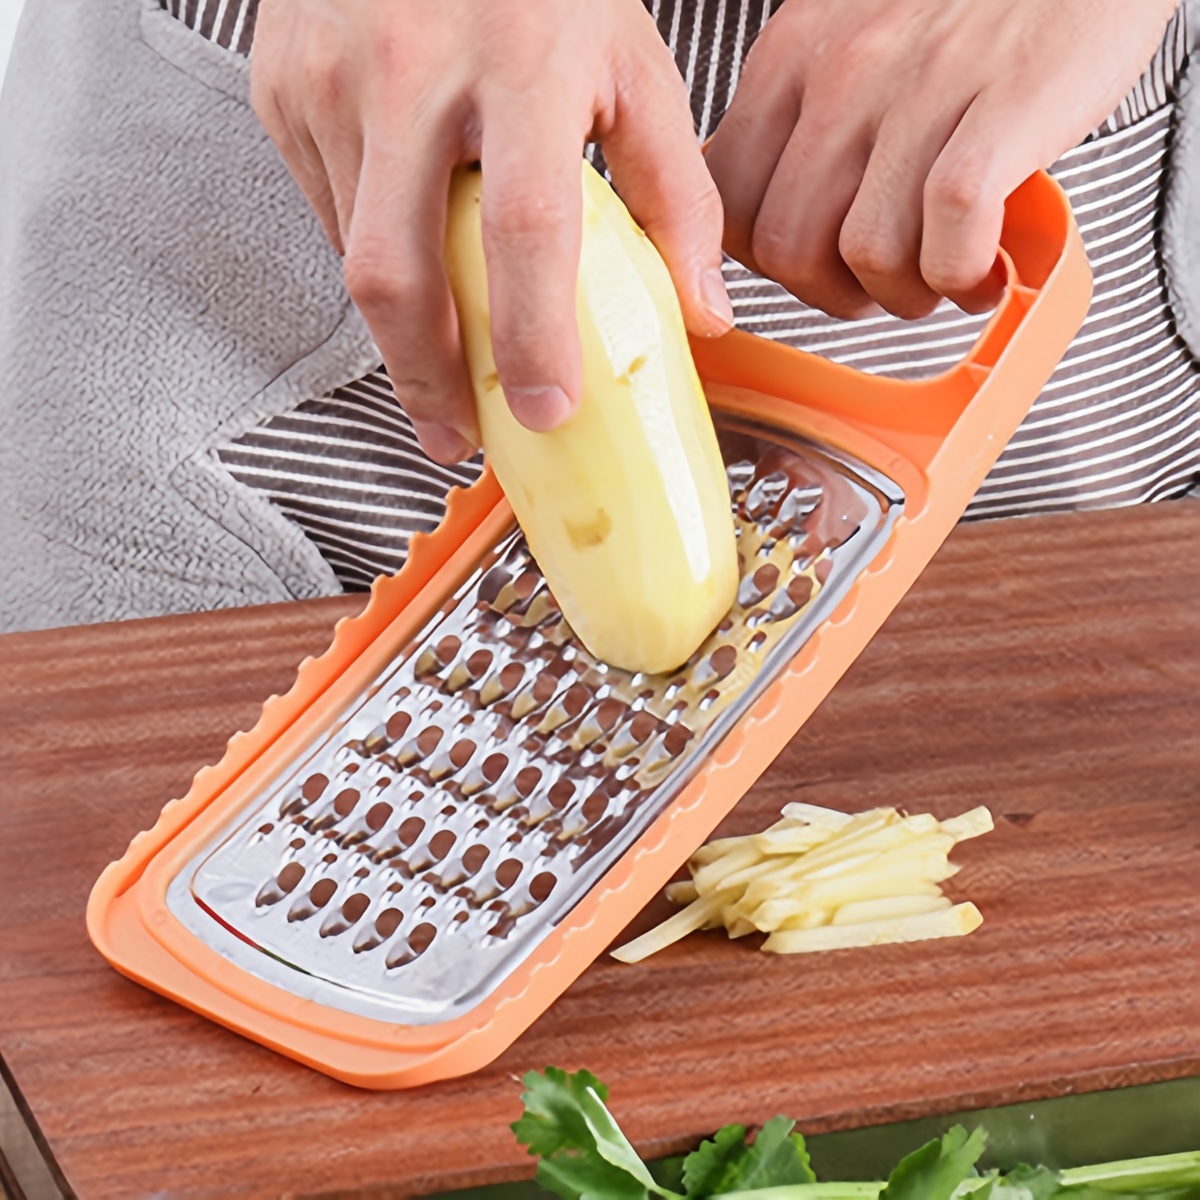 1pc Multifunctional Vegetable Slicing & Dicing Tool For Home Kitchen Use,  Suitable For Potatoes, Carrots And Other Vegetables